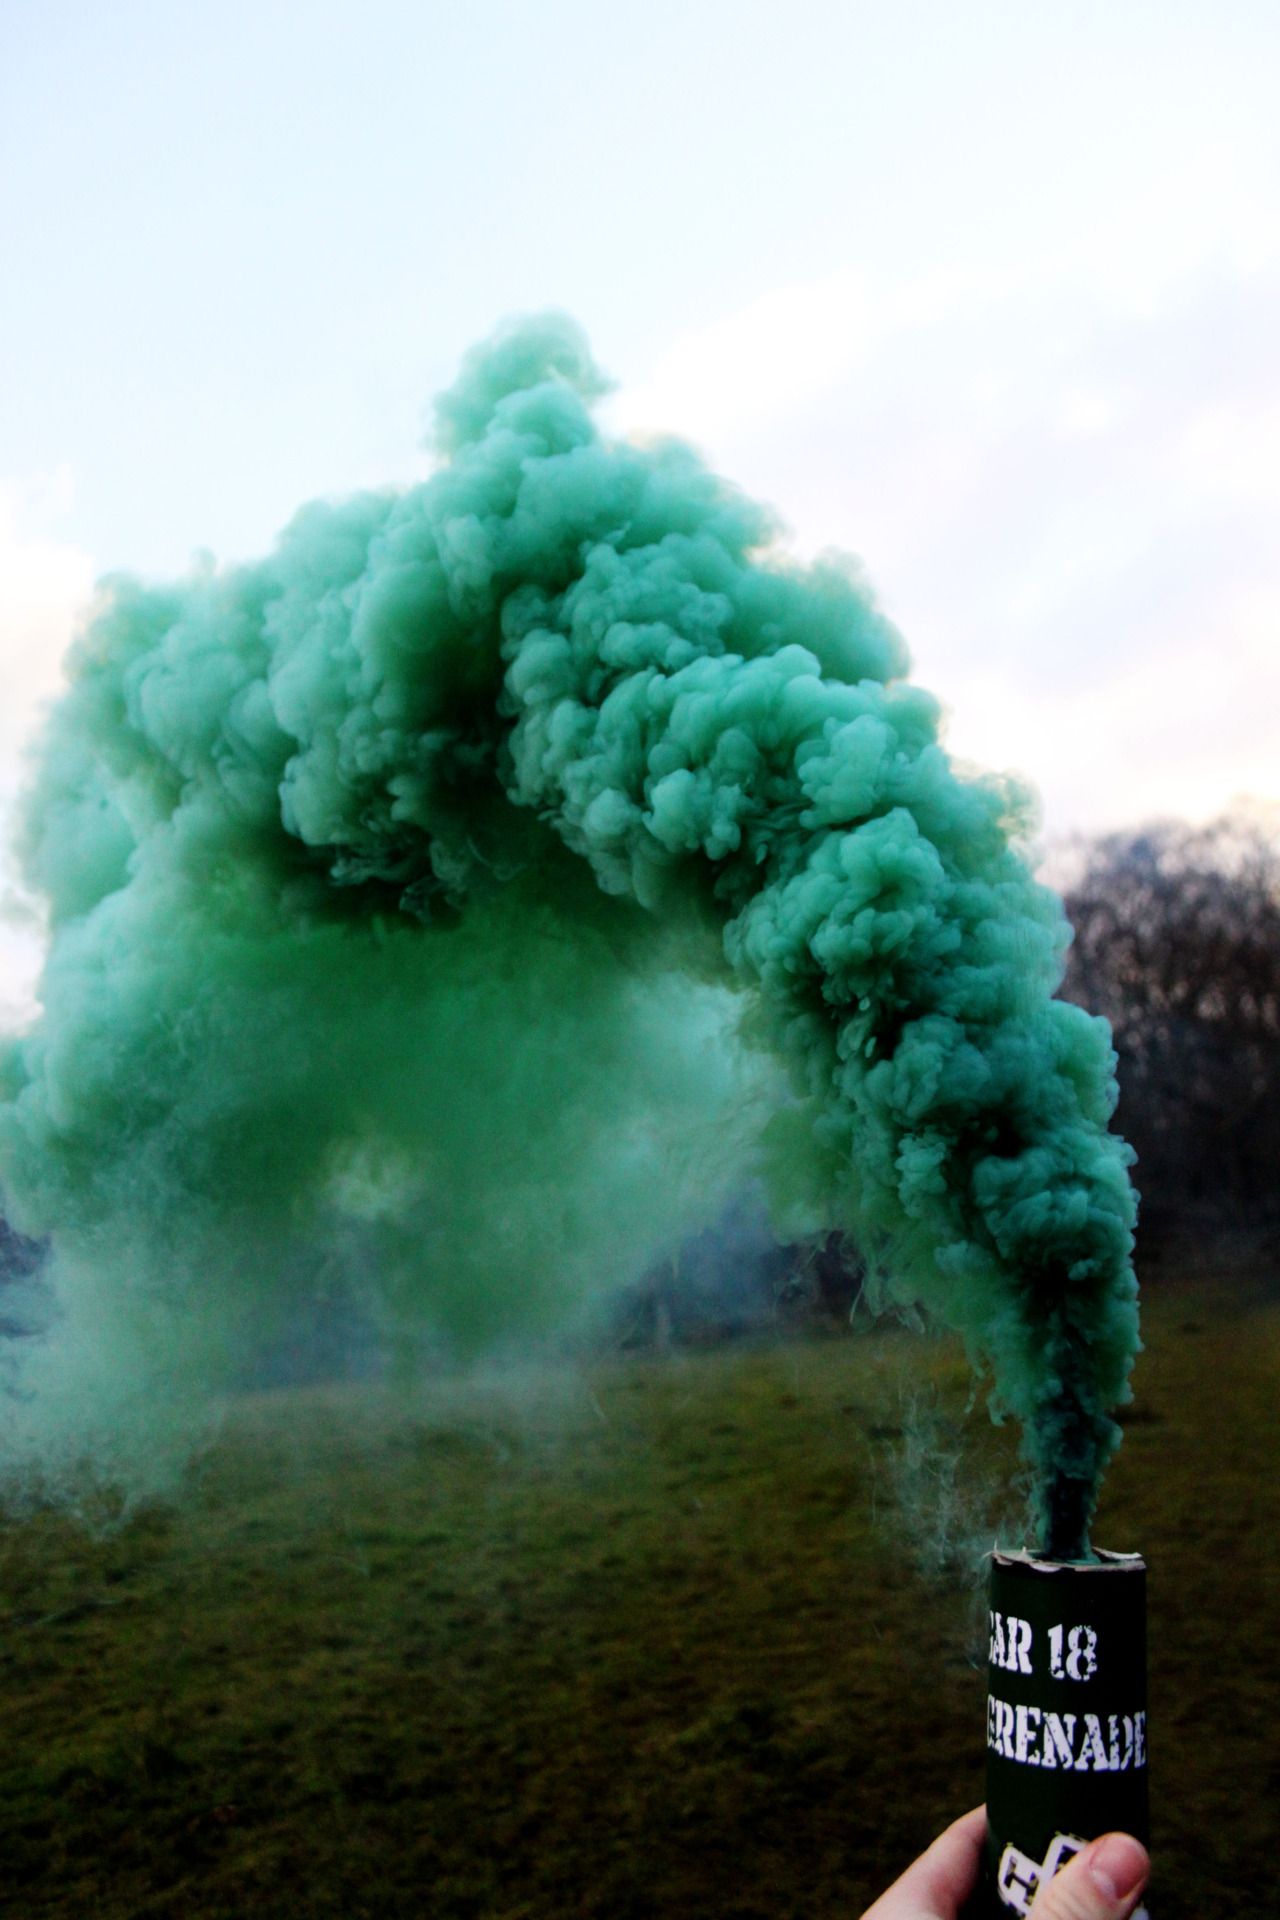 This color is stunning | Images | Pinterest | Smoke, Smoke bomb ...